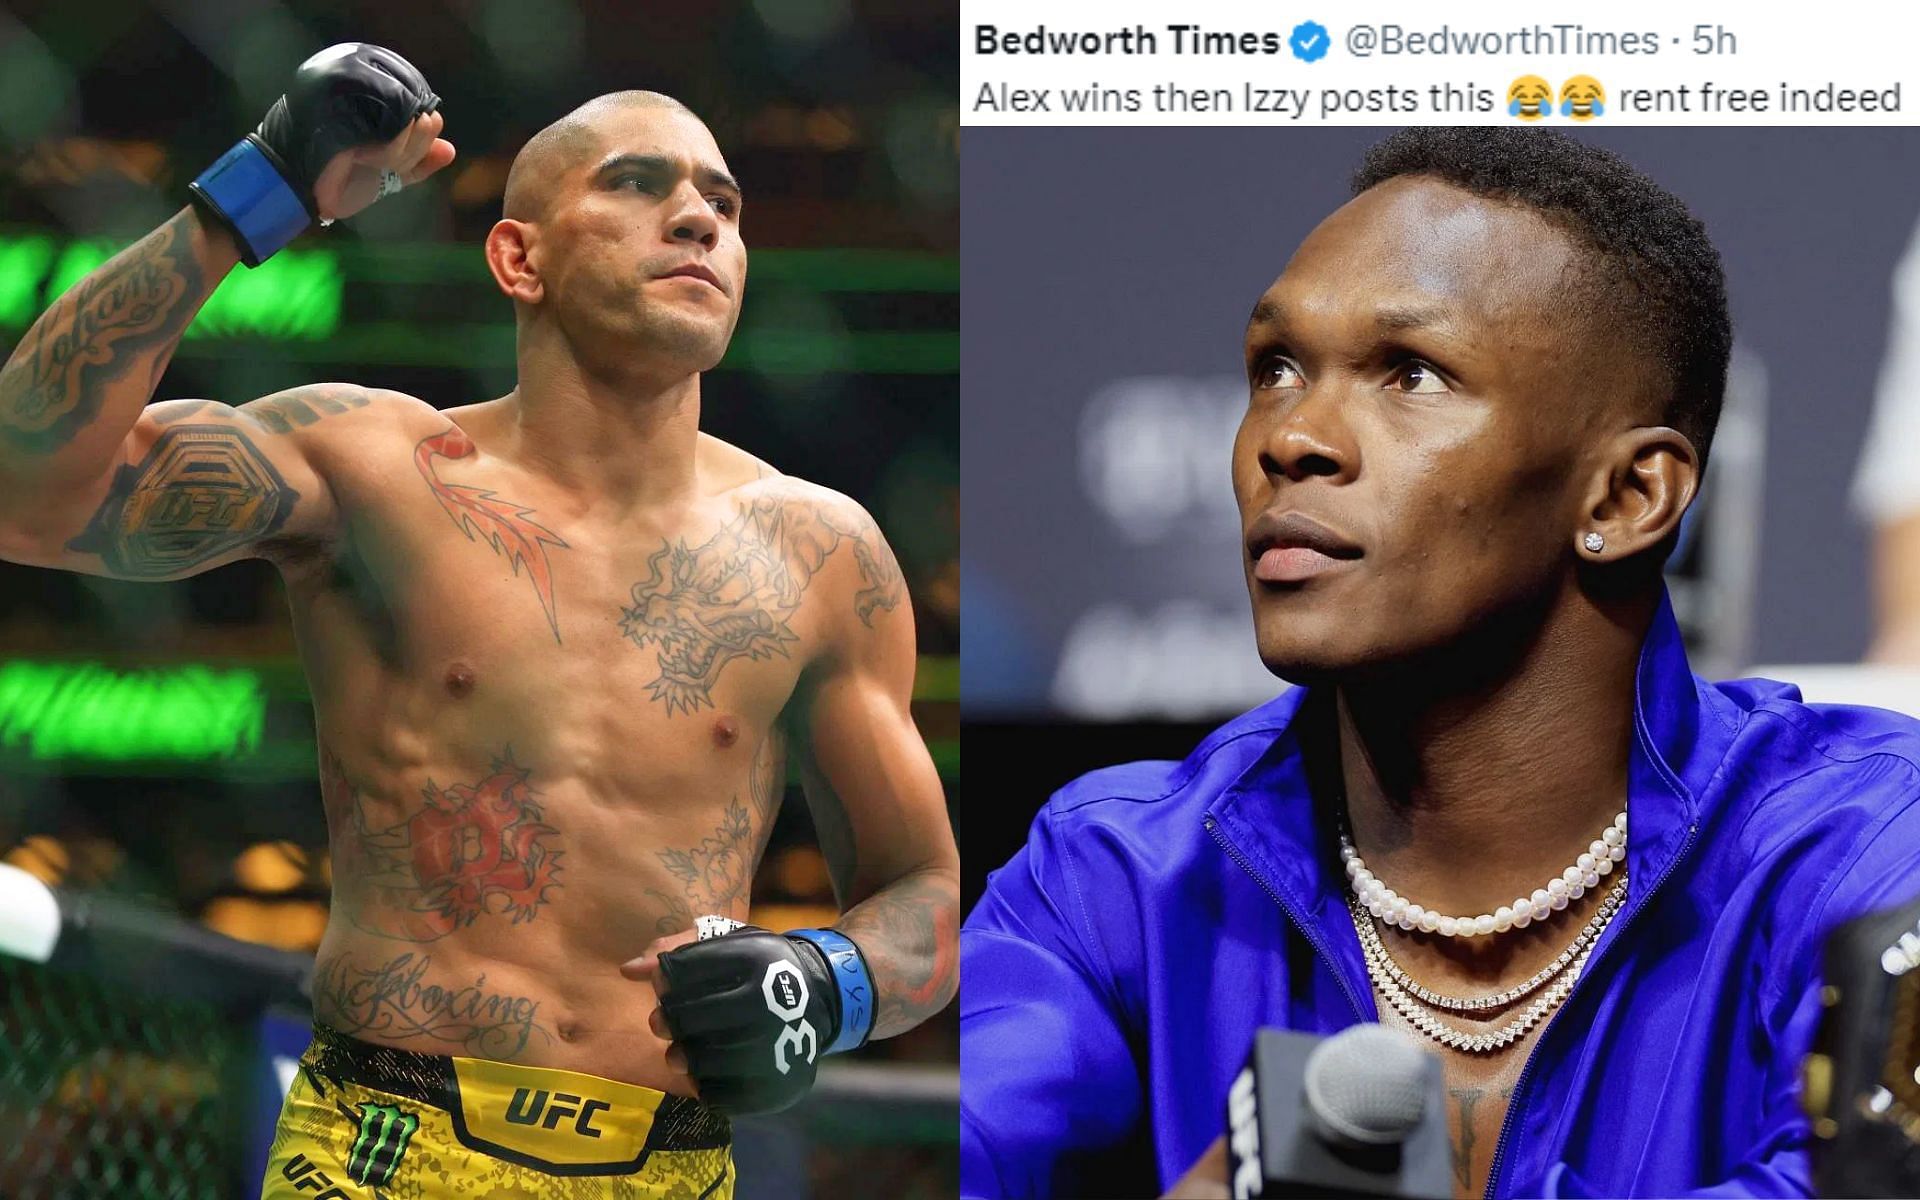 Israel Adesanya (right) heavily criticized by fans for reaction to Alex Pereira